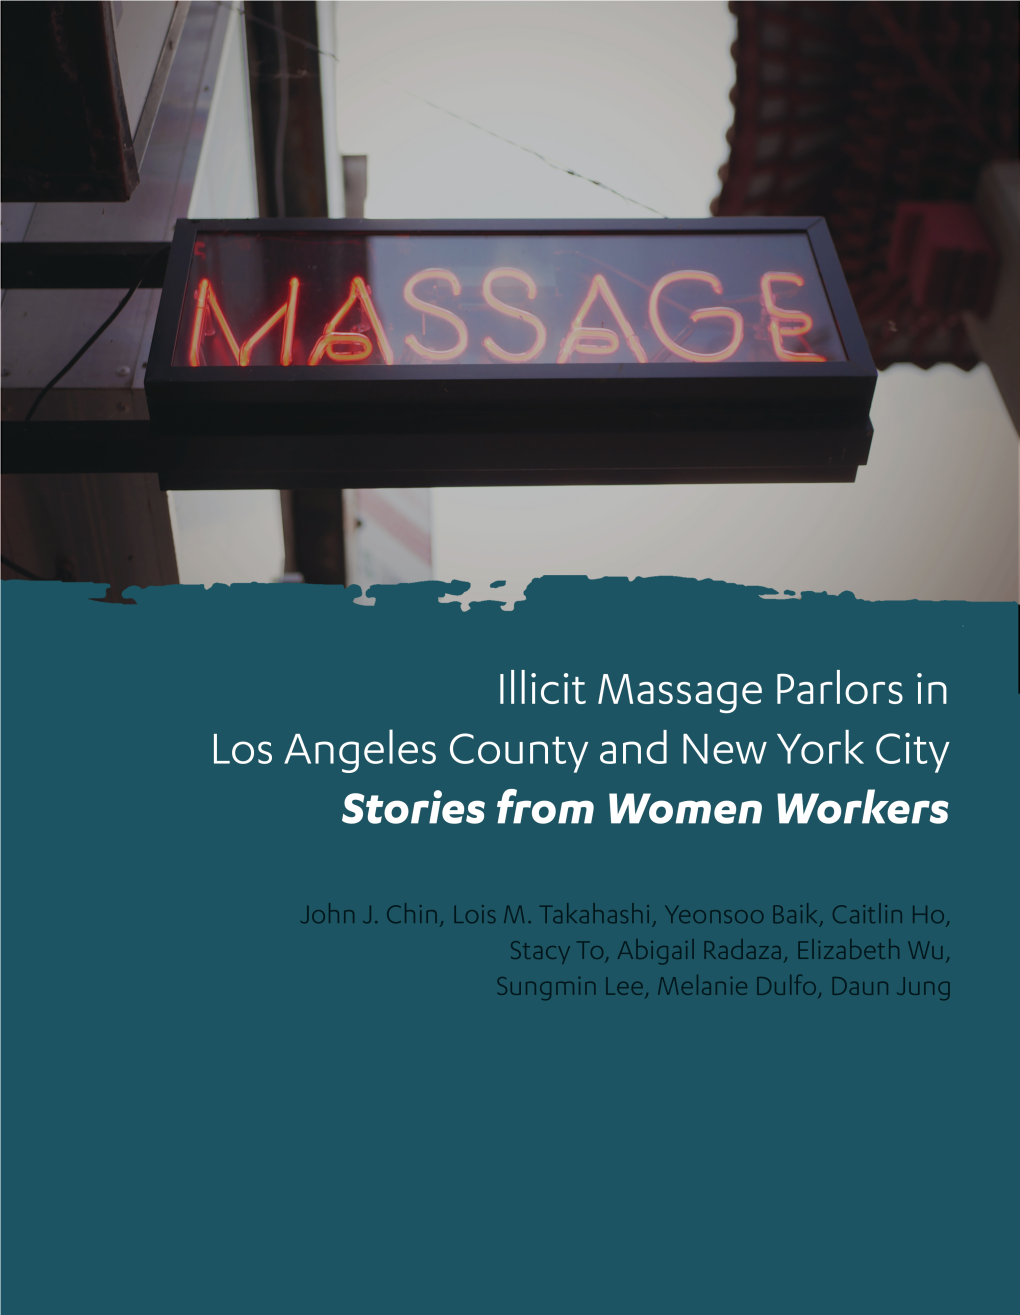 Illicit Massage Parlors in Los Angeles County and New York City